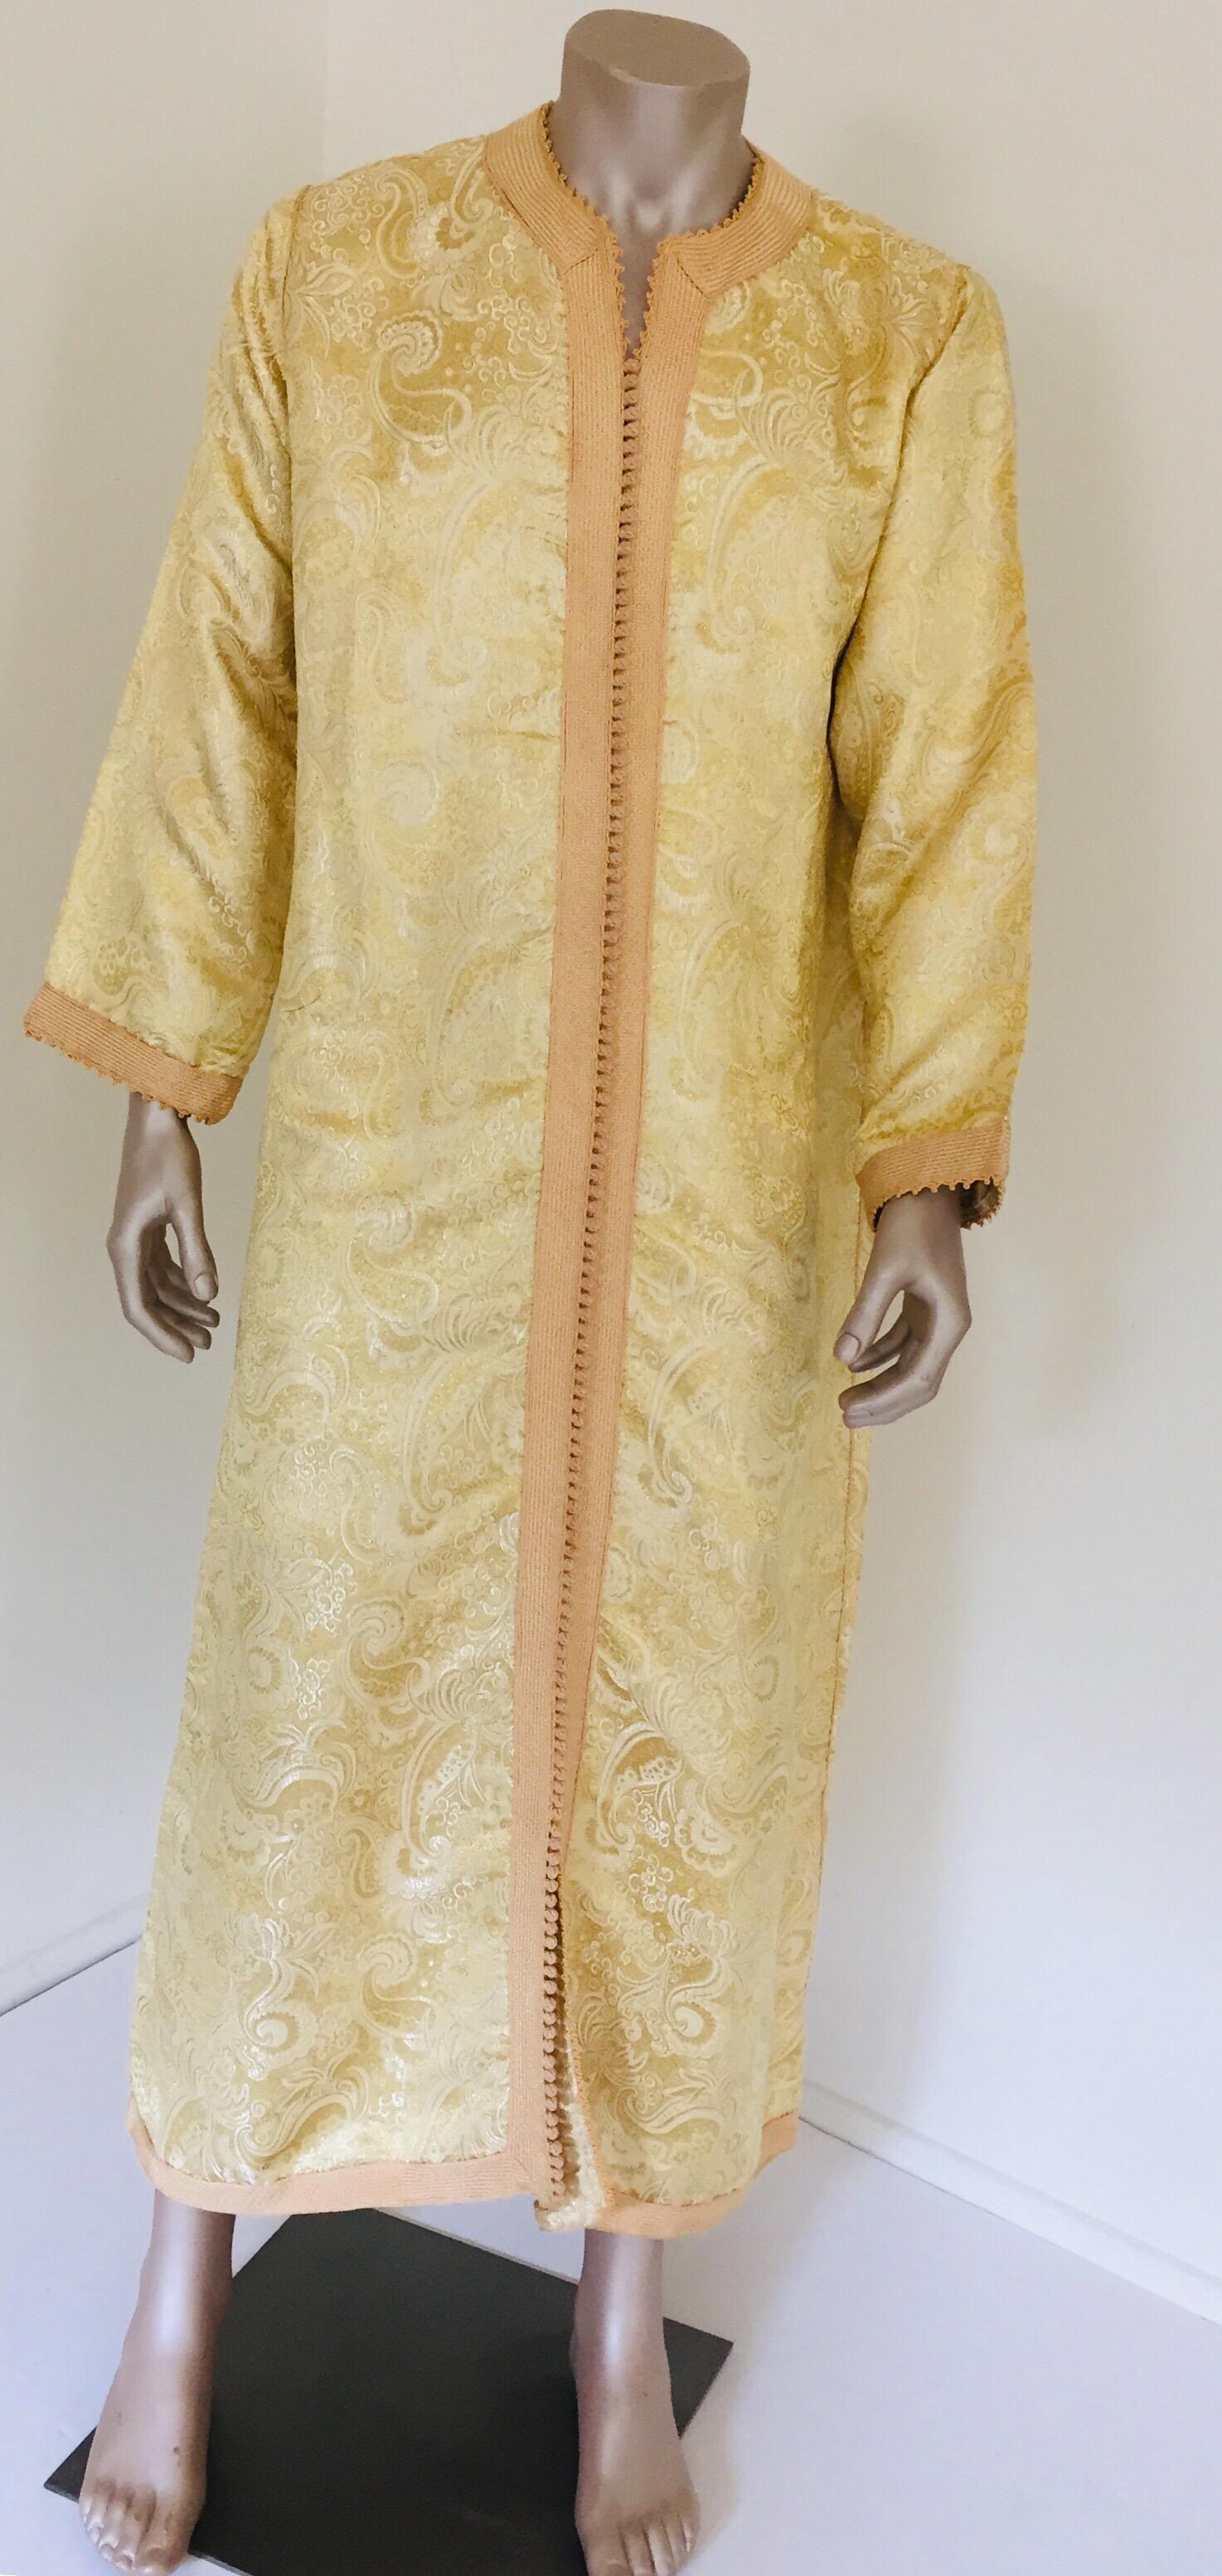 Evening or interior metallic gold brocade dress kaftan with silver and gold trim.
handmade ceremonial caftan from North Africa, Morocco.
Vintage exotic 1970s silver metallic brocade caftan gown.
The luminous gold metallic caftan maxi dress caftan